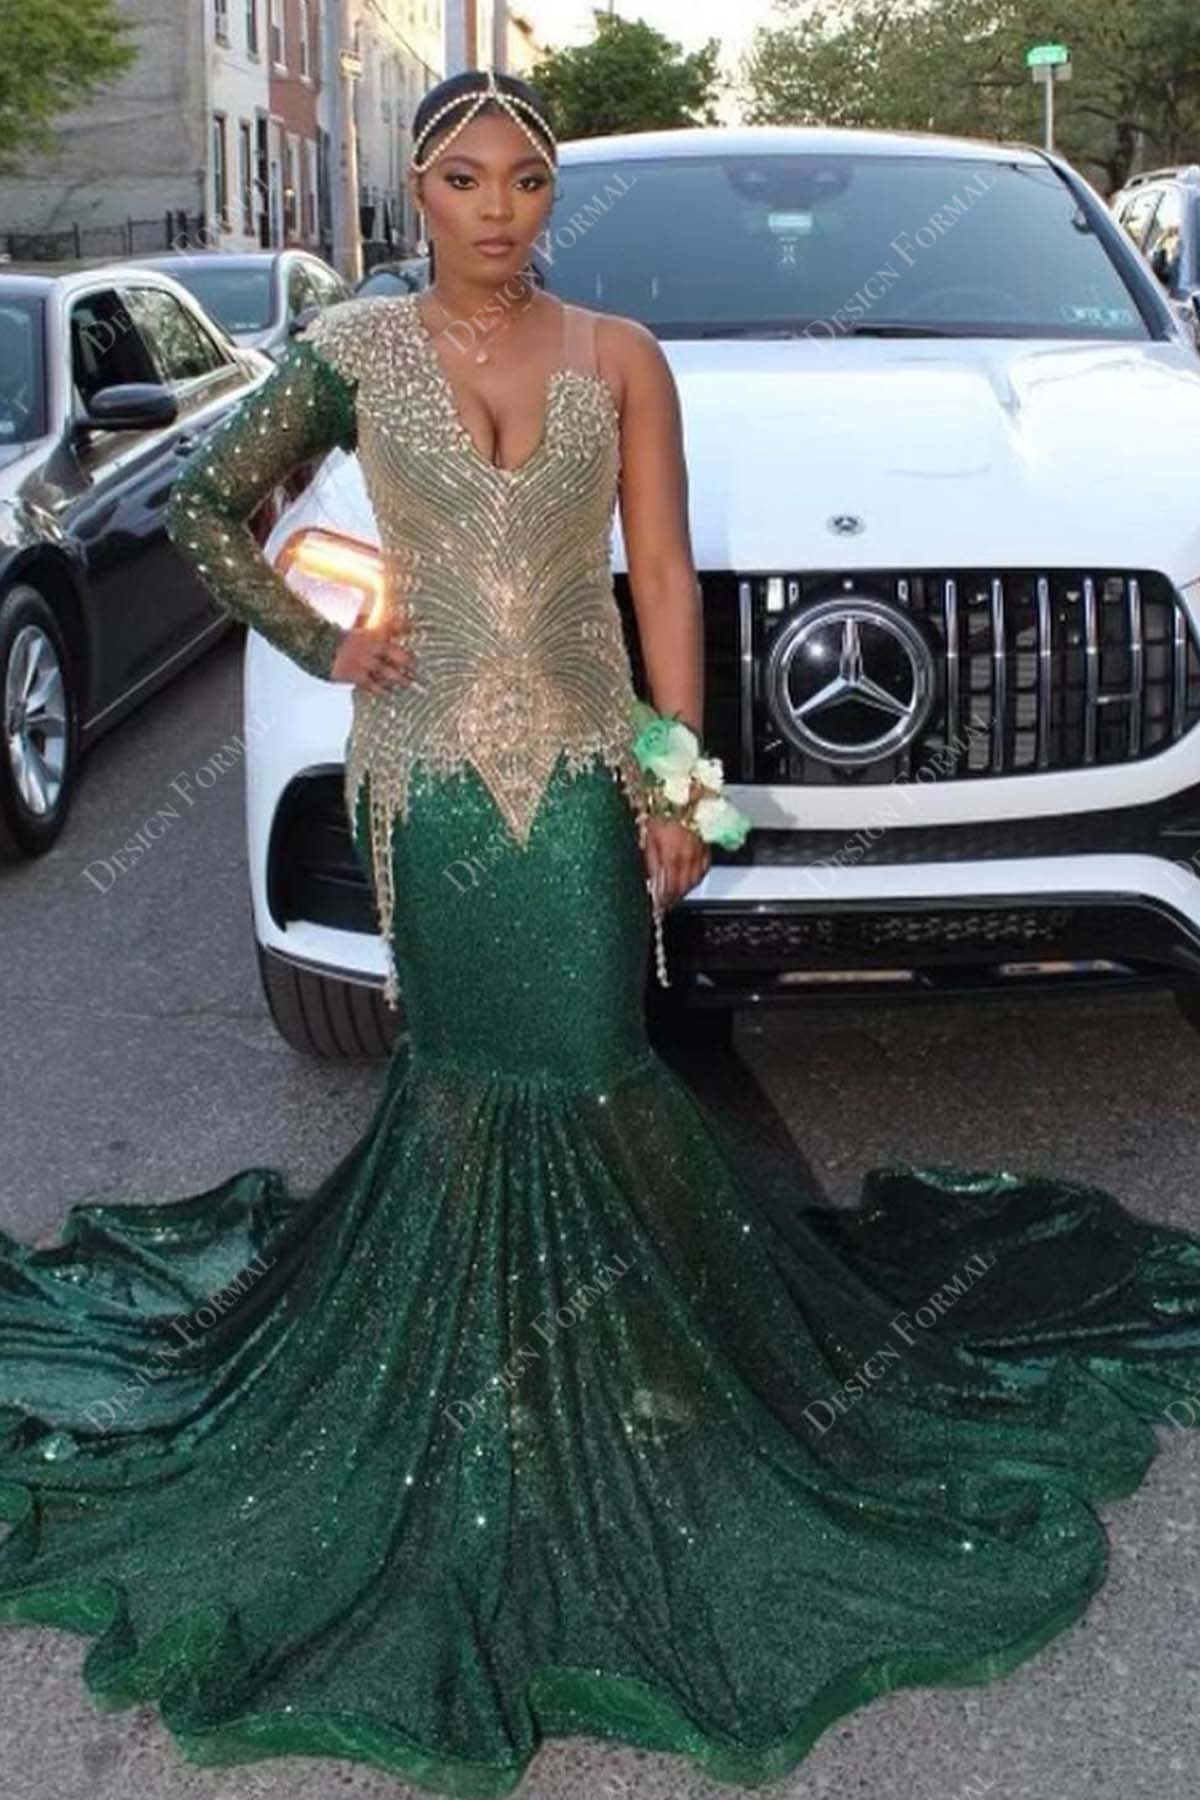 crystals emerald sequin one sleeve plunging mermaid prom dress